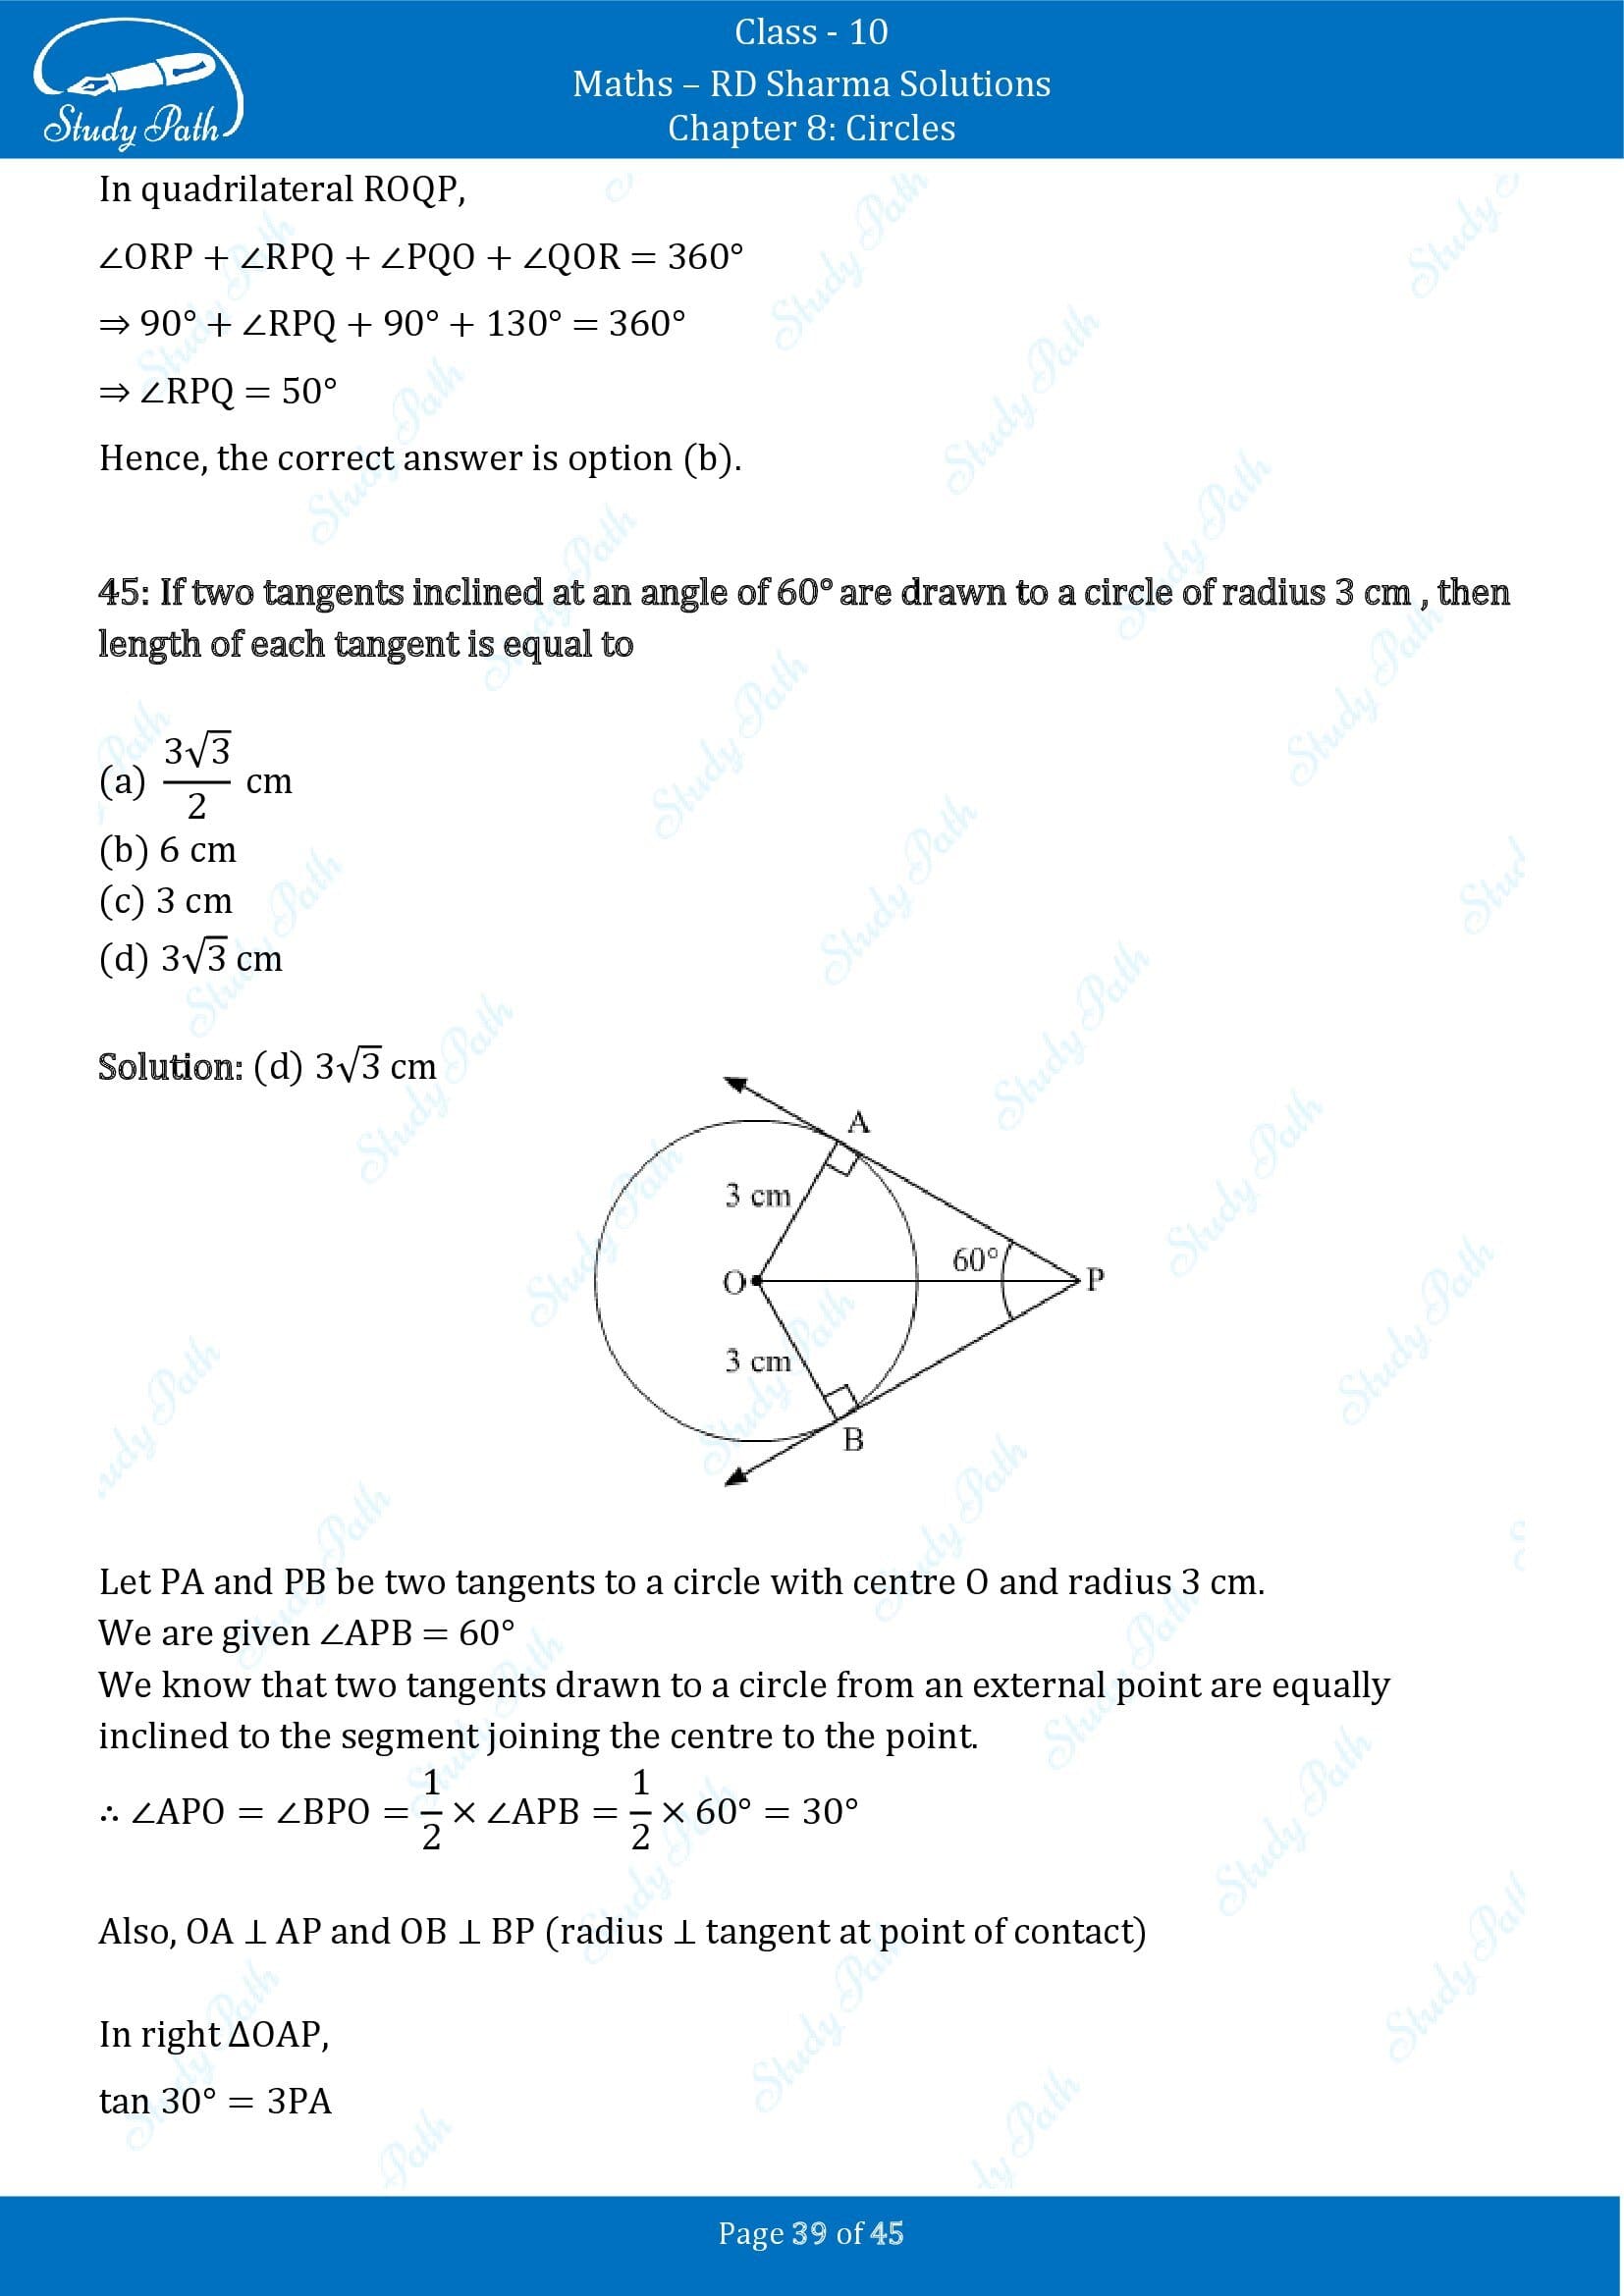 RD Sharma Solutions Class 10 Chapter 8 Circles Multiple Choice Questions MCQs 00039